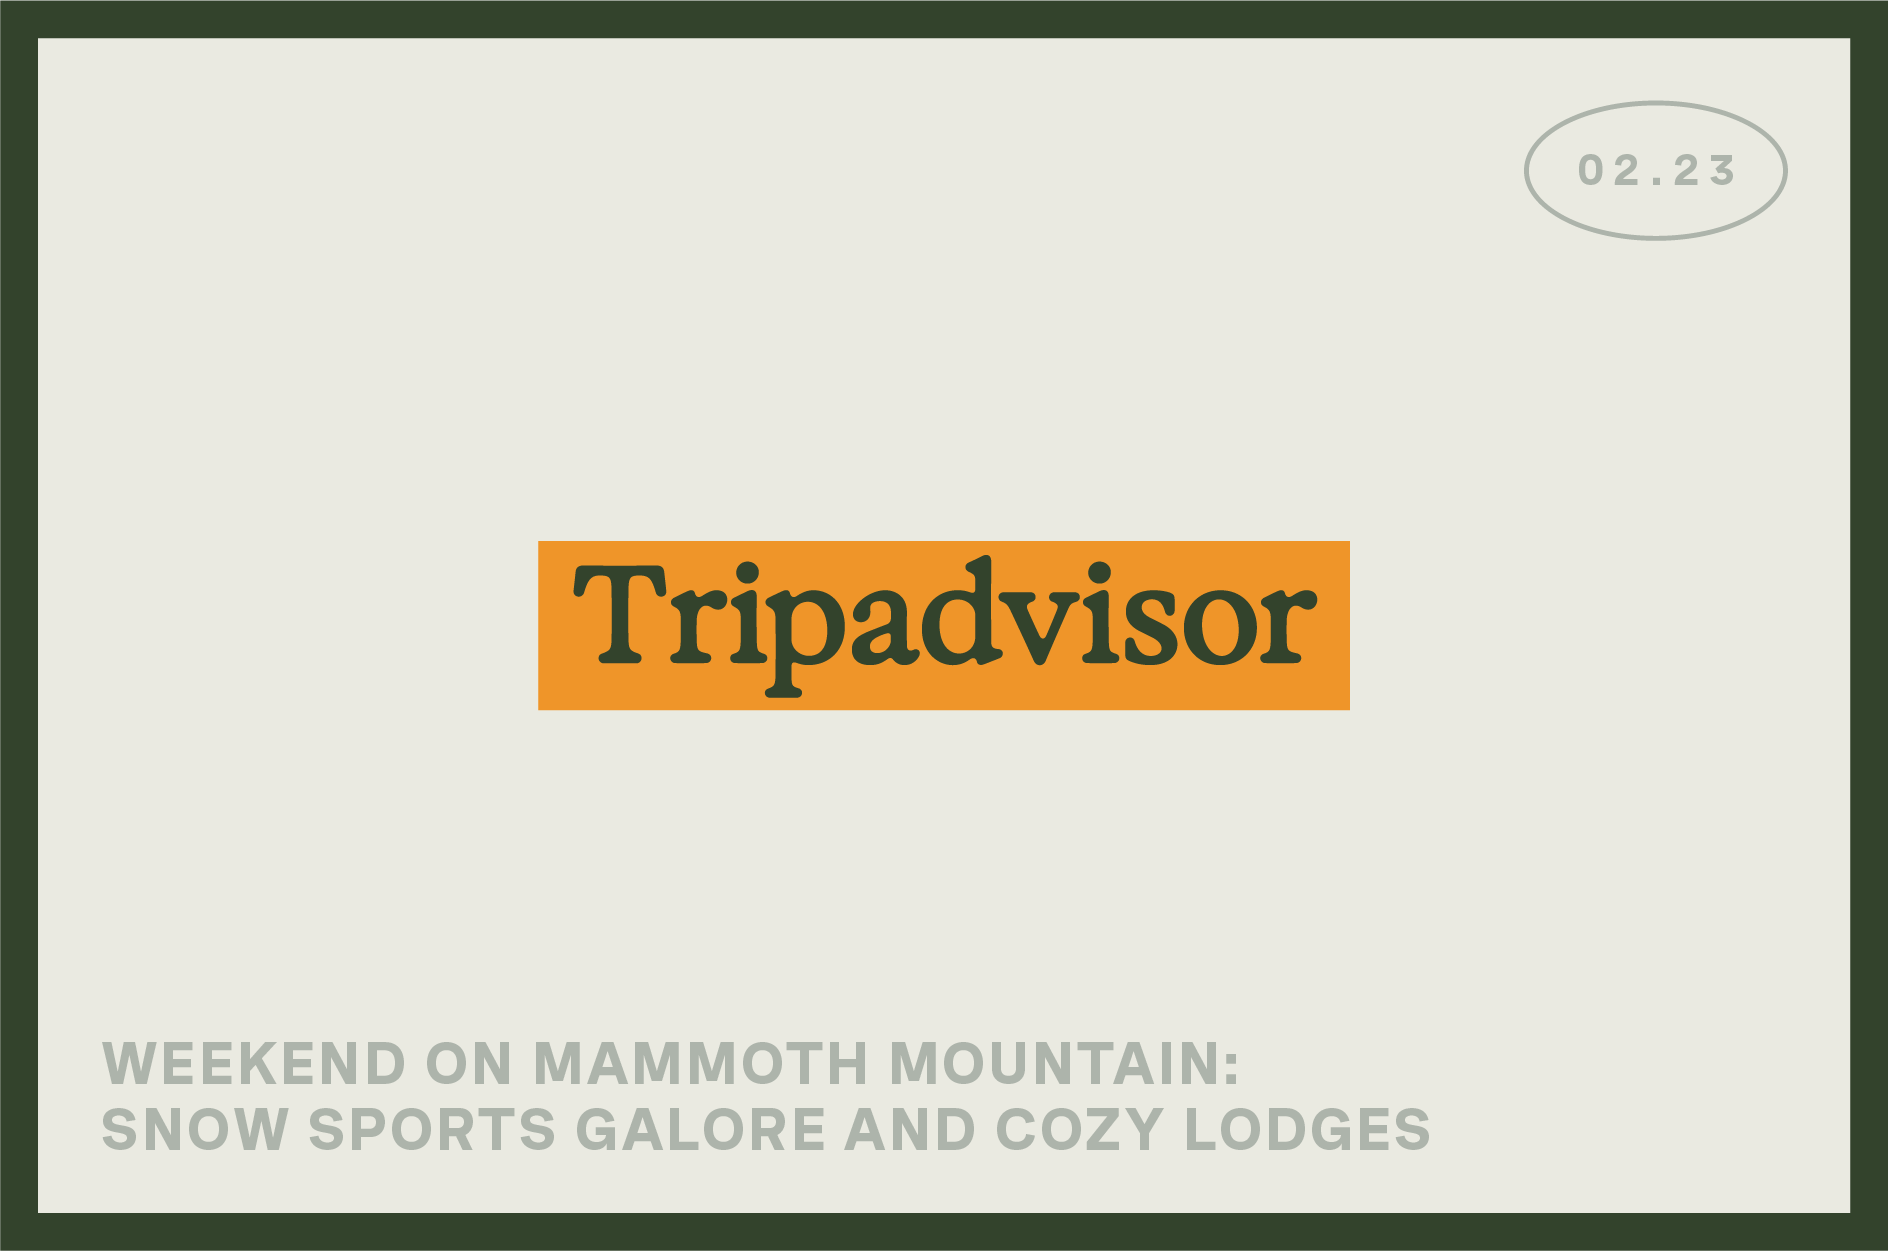 "Tripadvisor" banner showcases "Weekend on Mammoth Mountain: Snow sports galore and cozy lodges."